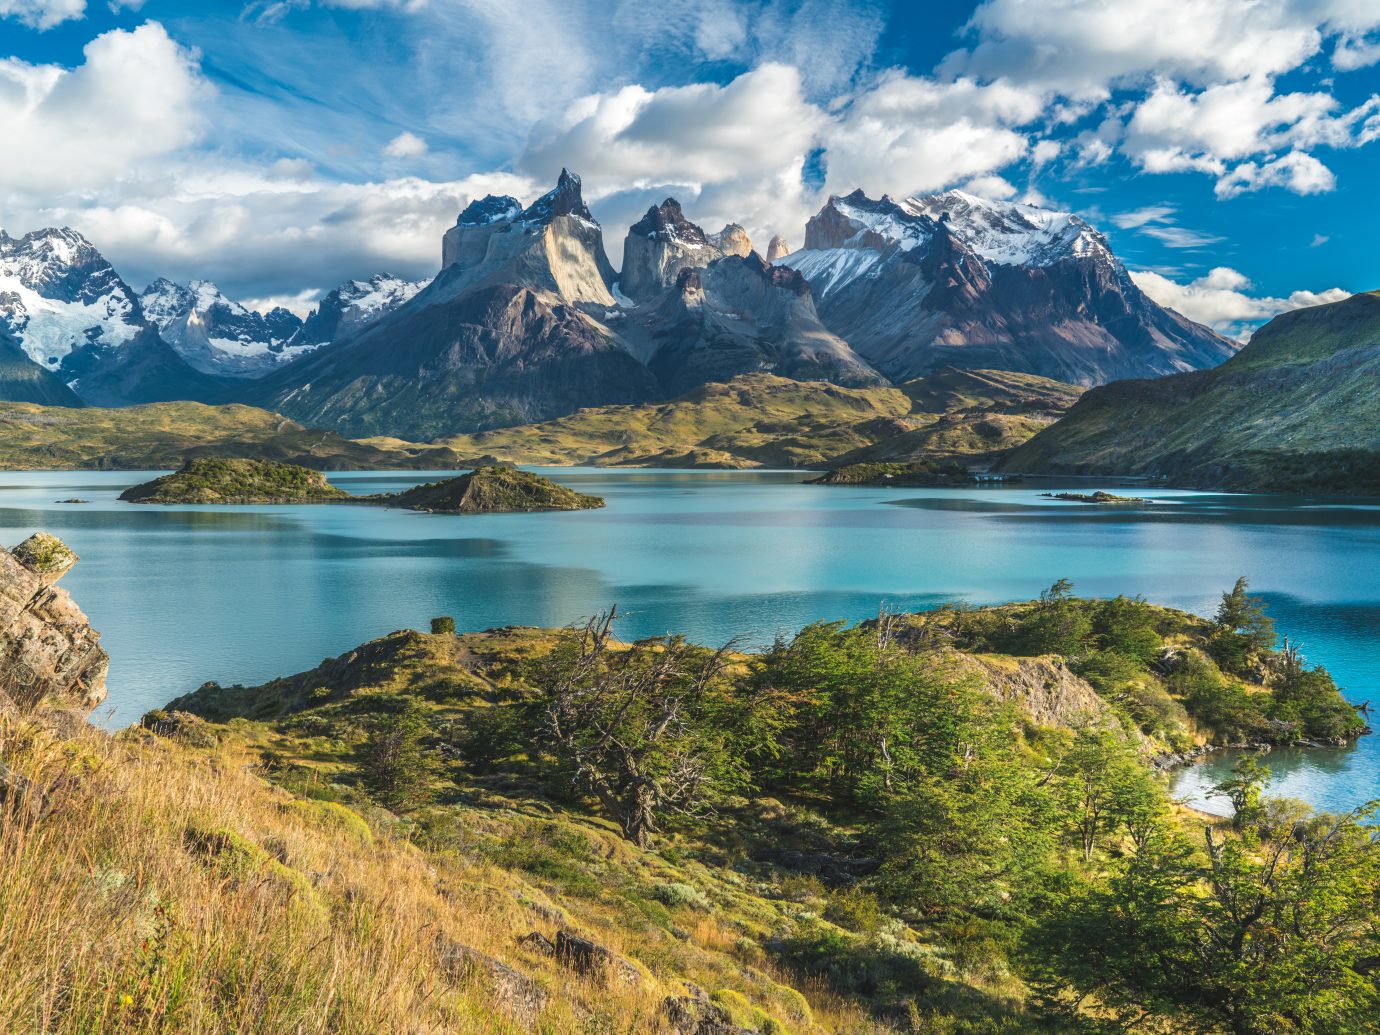 Blue lake on a snowy mountains background and cloudy sky Torres del paine